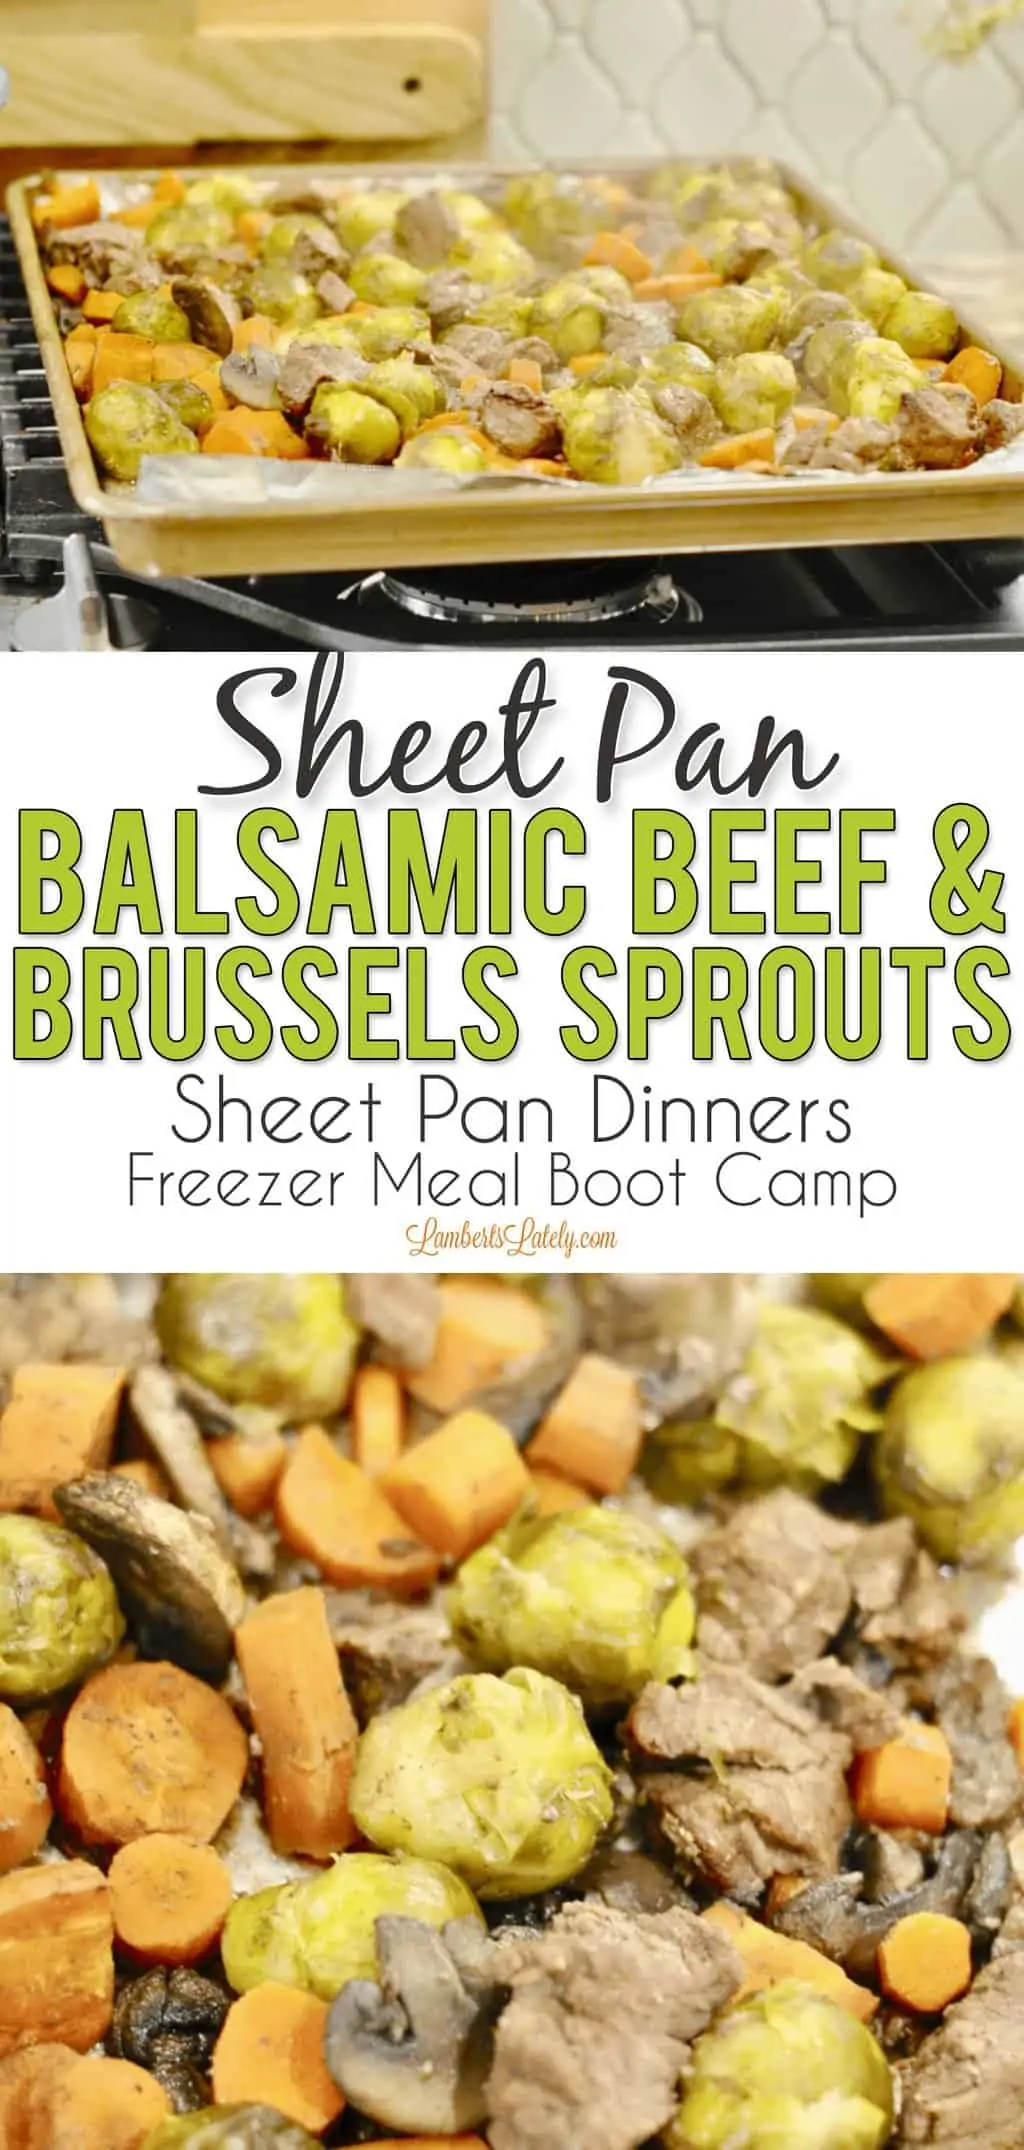 Sheet Pan Balsamic Beef and Brussels Sprouts.